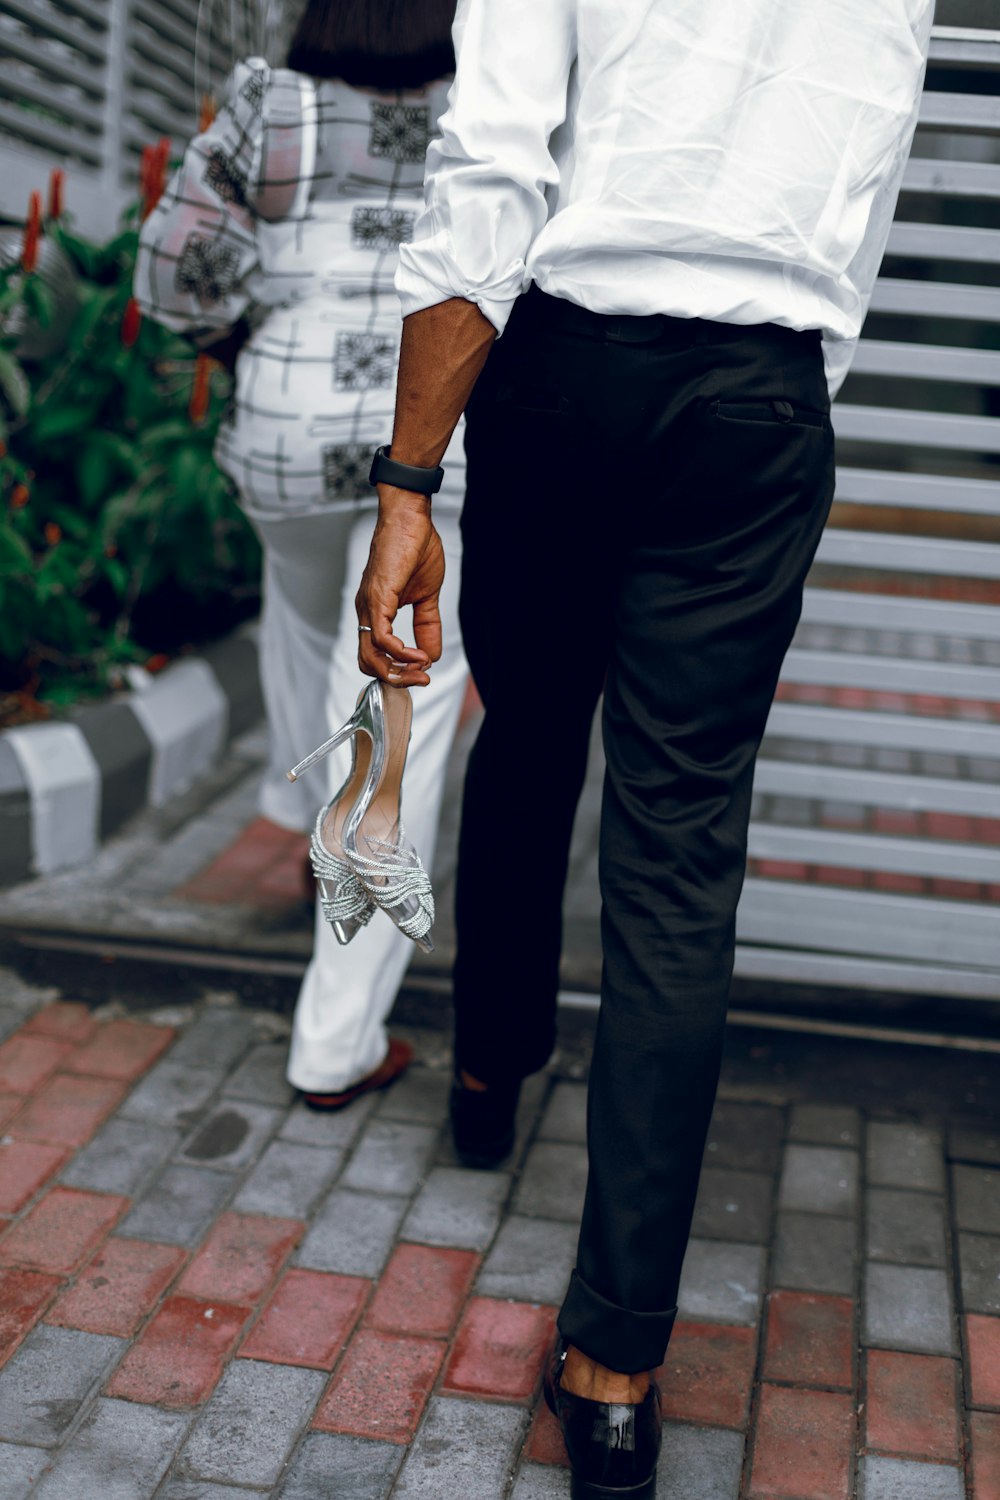 a man in white shirt and black pants holding a pair of shoes